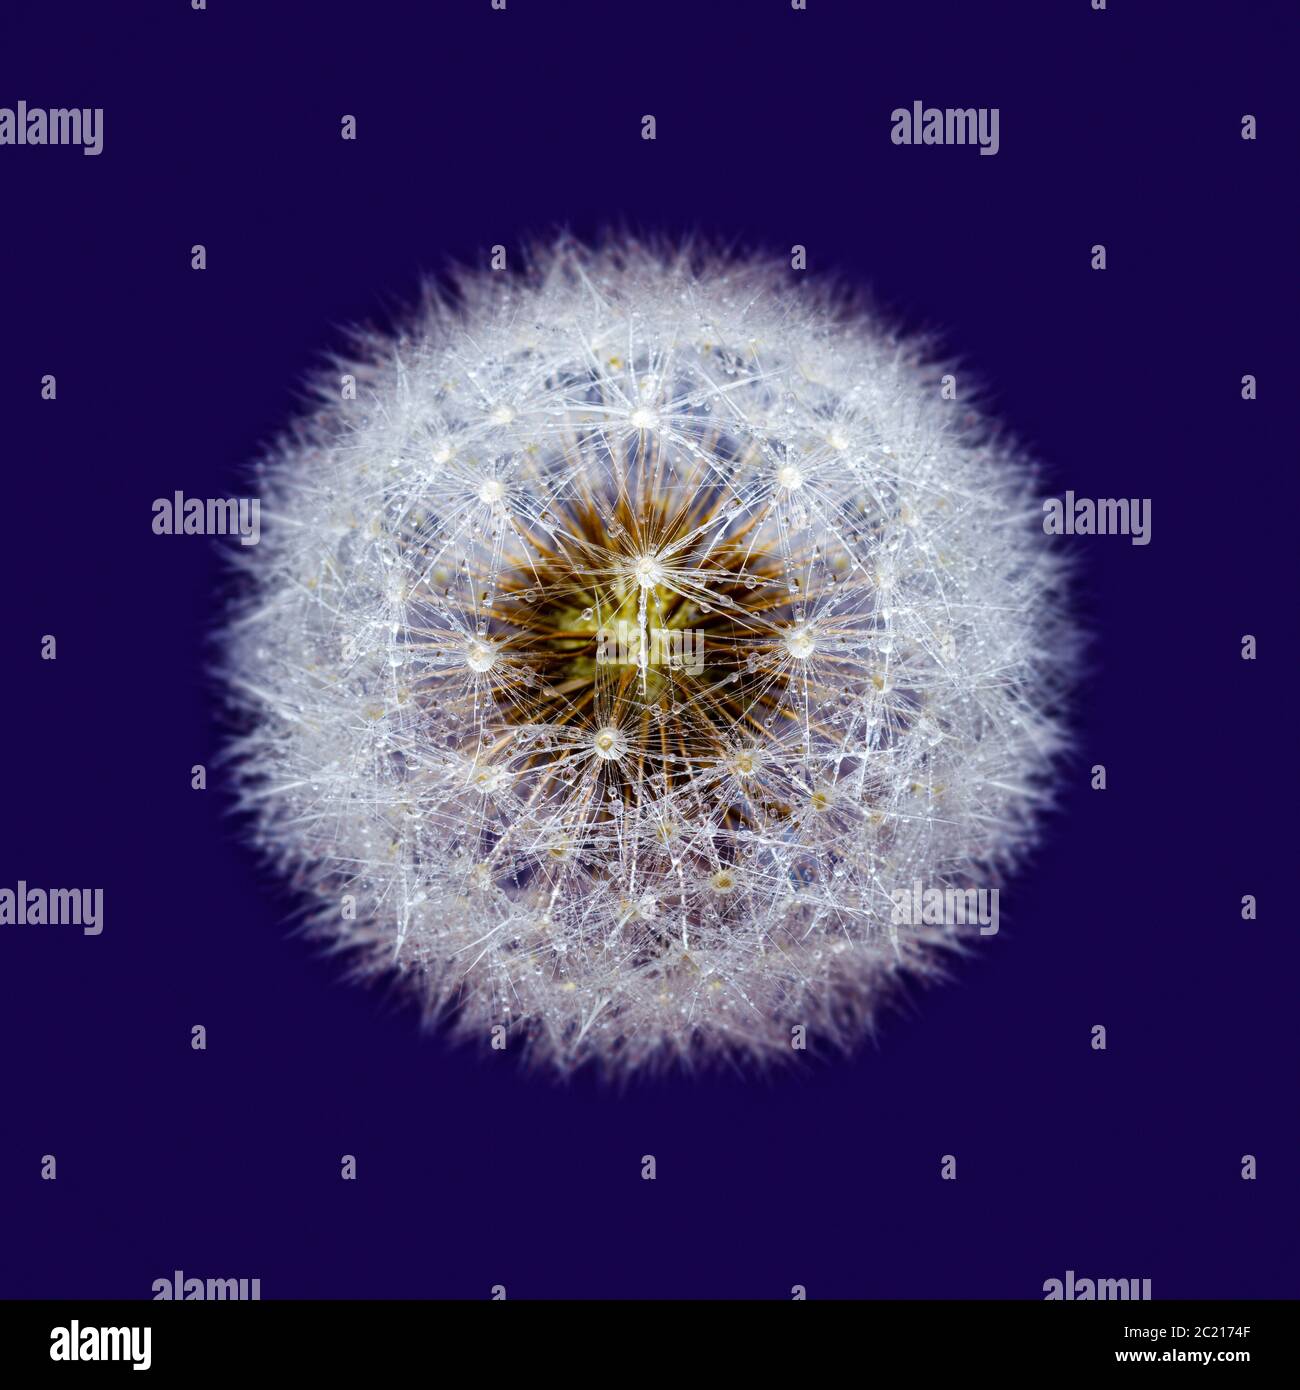 Isolated Dandelion sead head with dew drops, on purple. Stock Photo